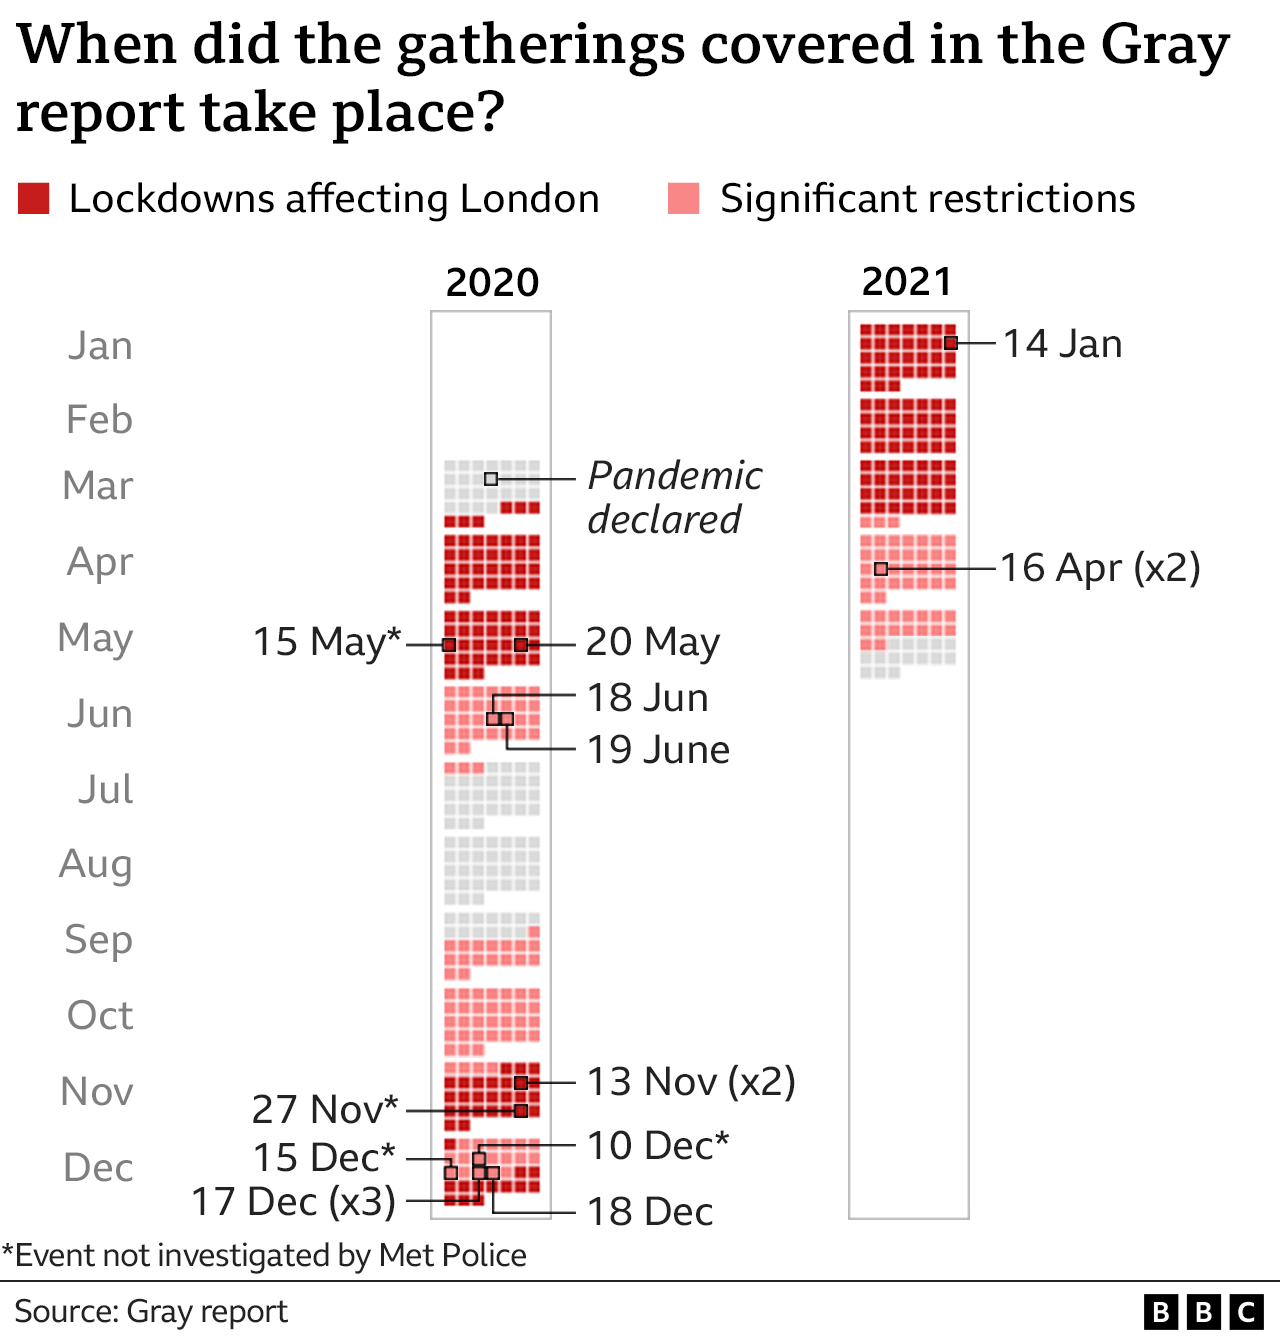 Graphic showing the gatherings in the Gray report on a calendar.